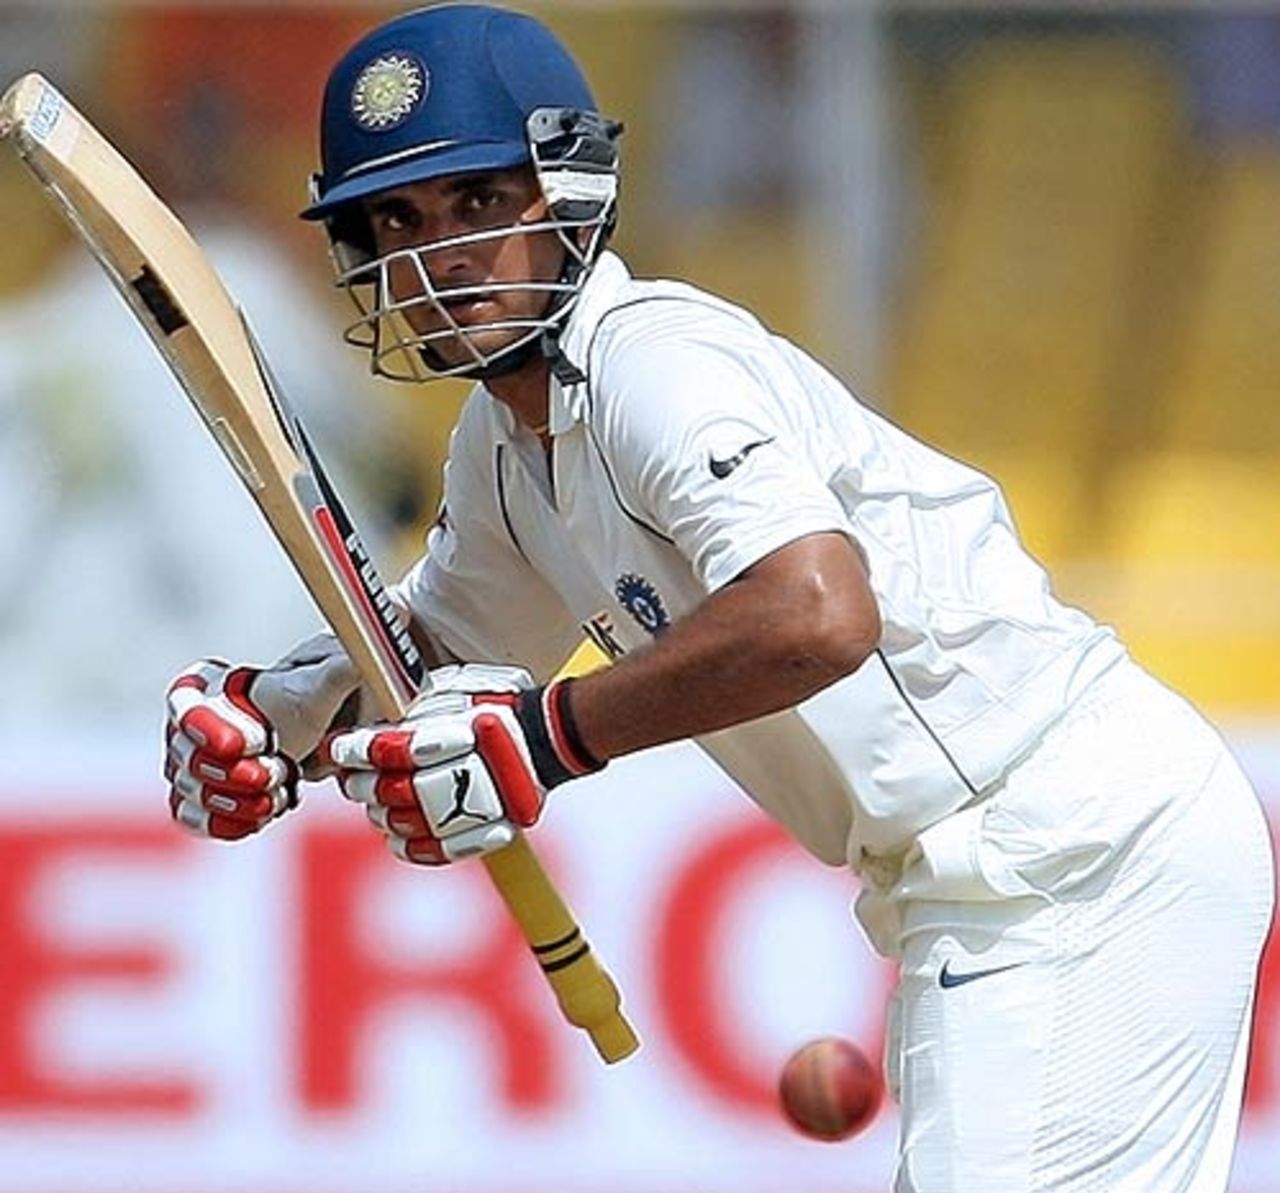 Sourav Ganguly square drives on his way to a fluent 87, India v South Africa, 2nd Test, Ahmedabad, 3rd day, April 5, 2008